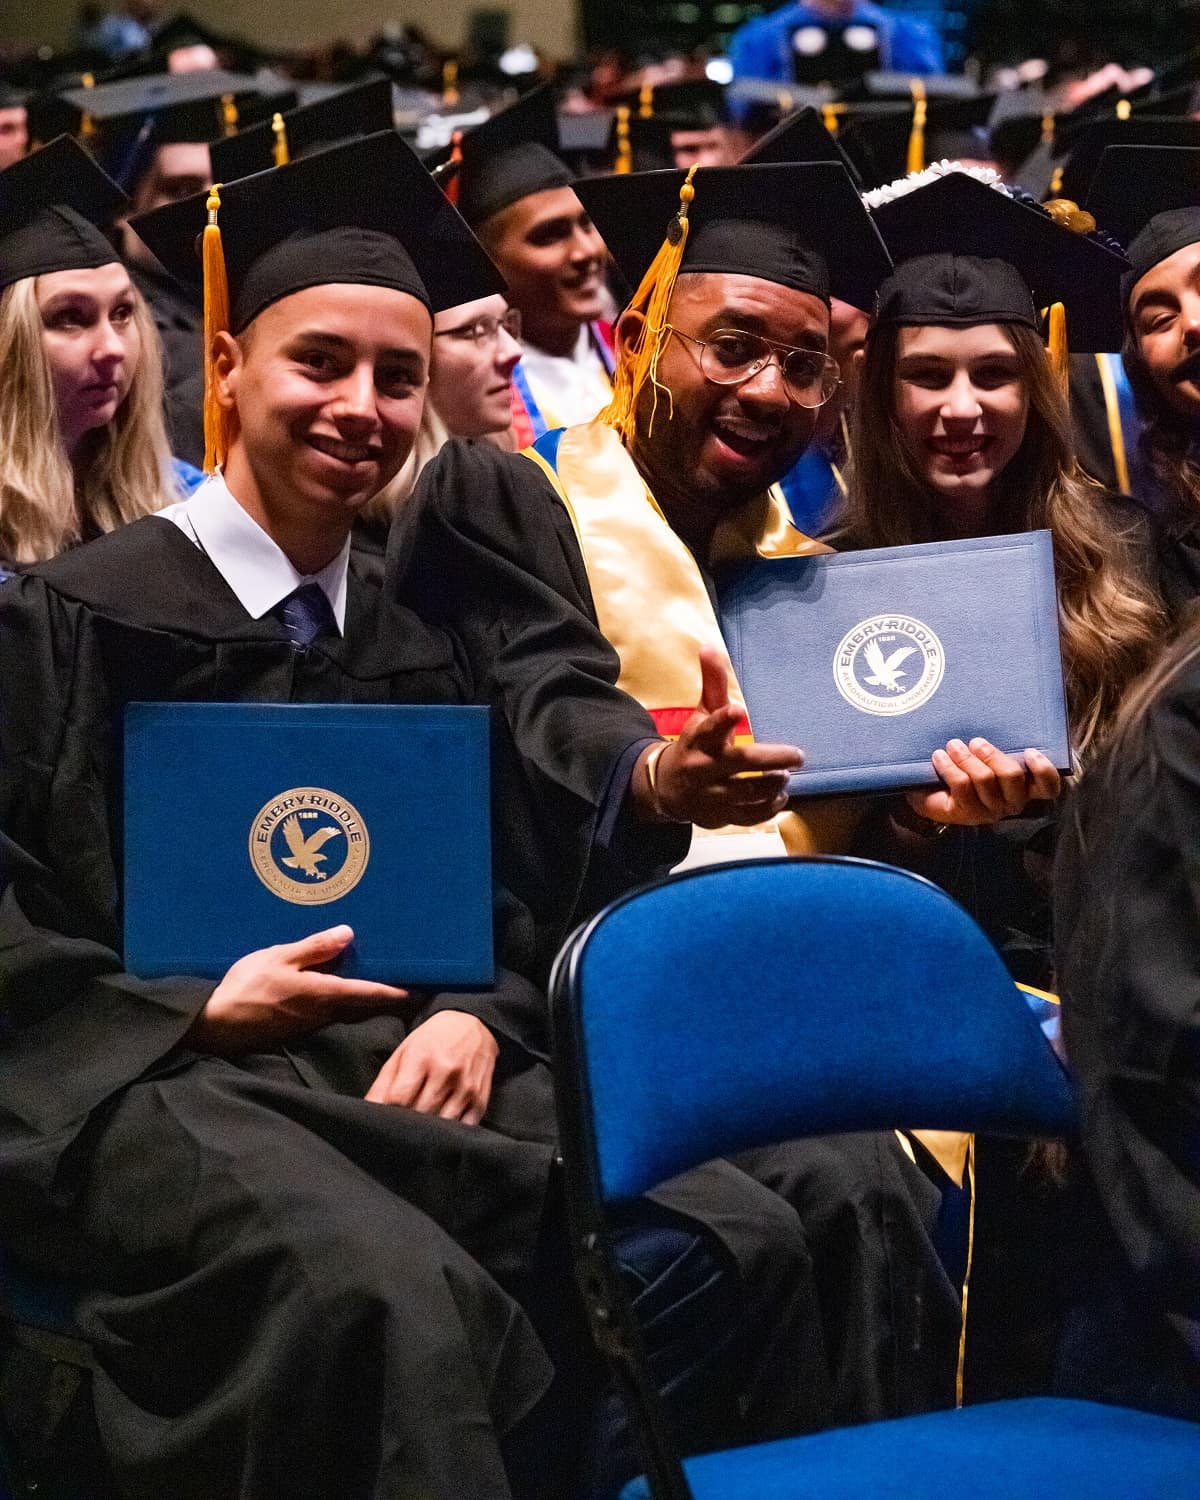 Students hold up degrees